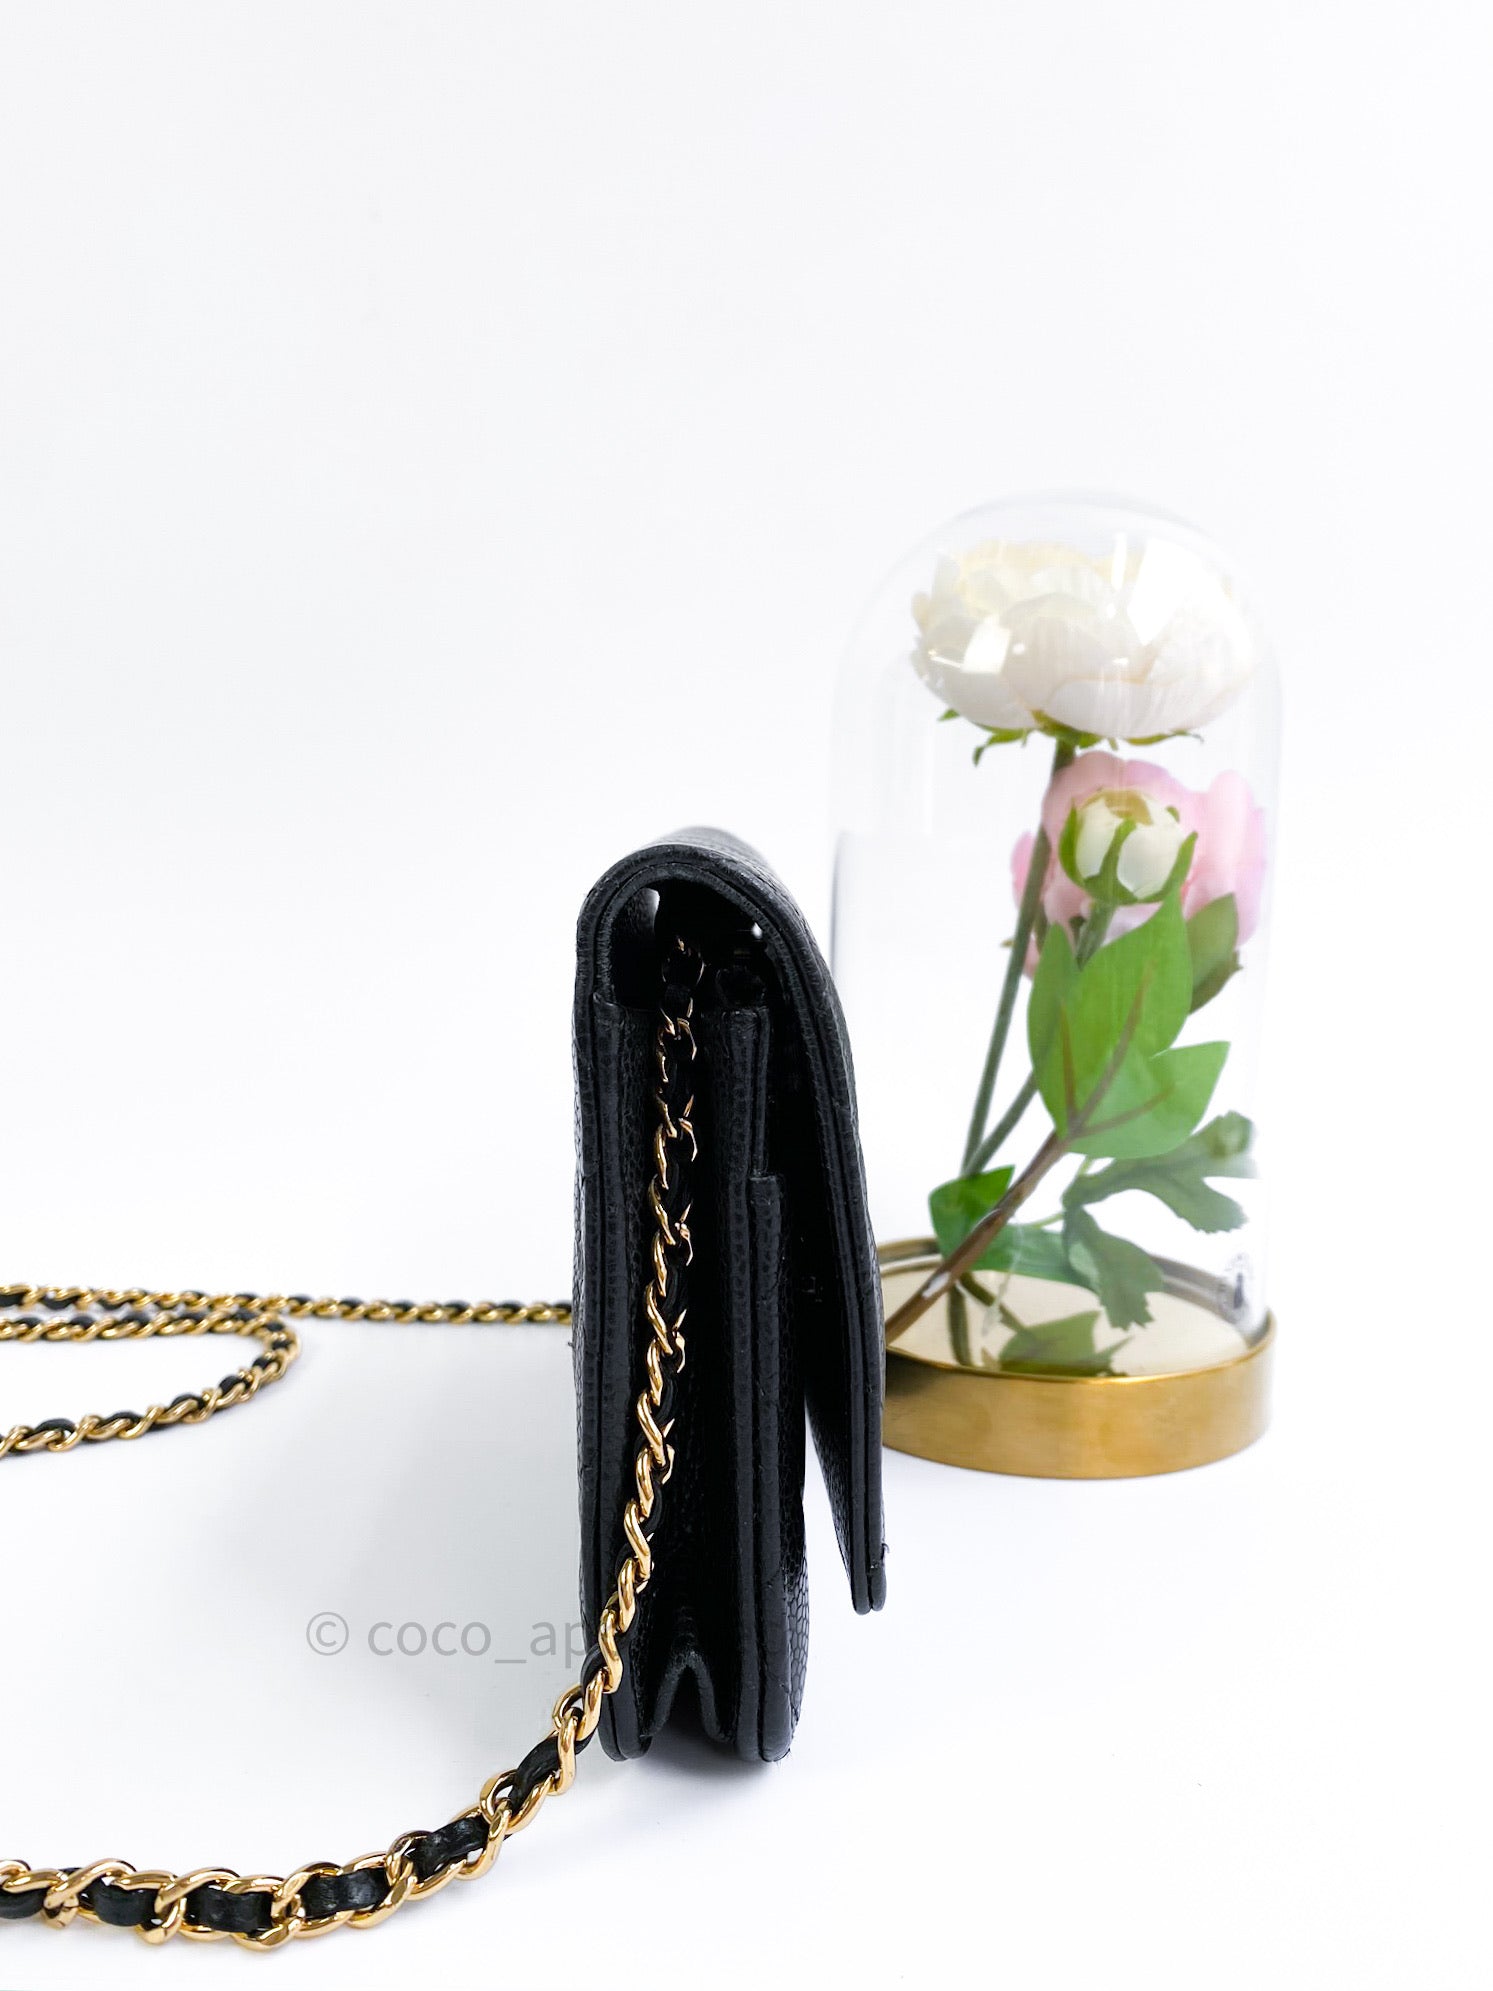 Chanel Quilted Wallet on Chain WOC Black Caviar Gold Hardware – Coco  Approved Studio